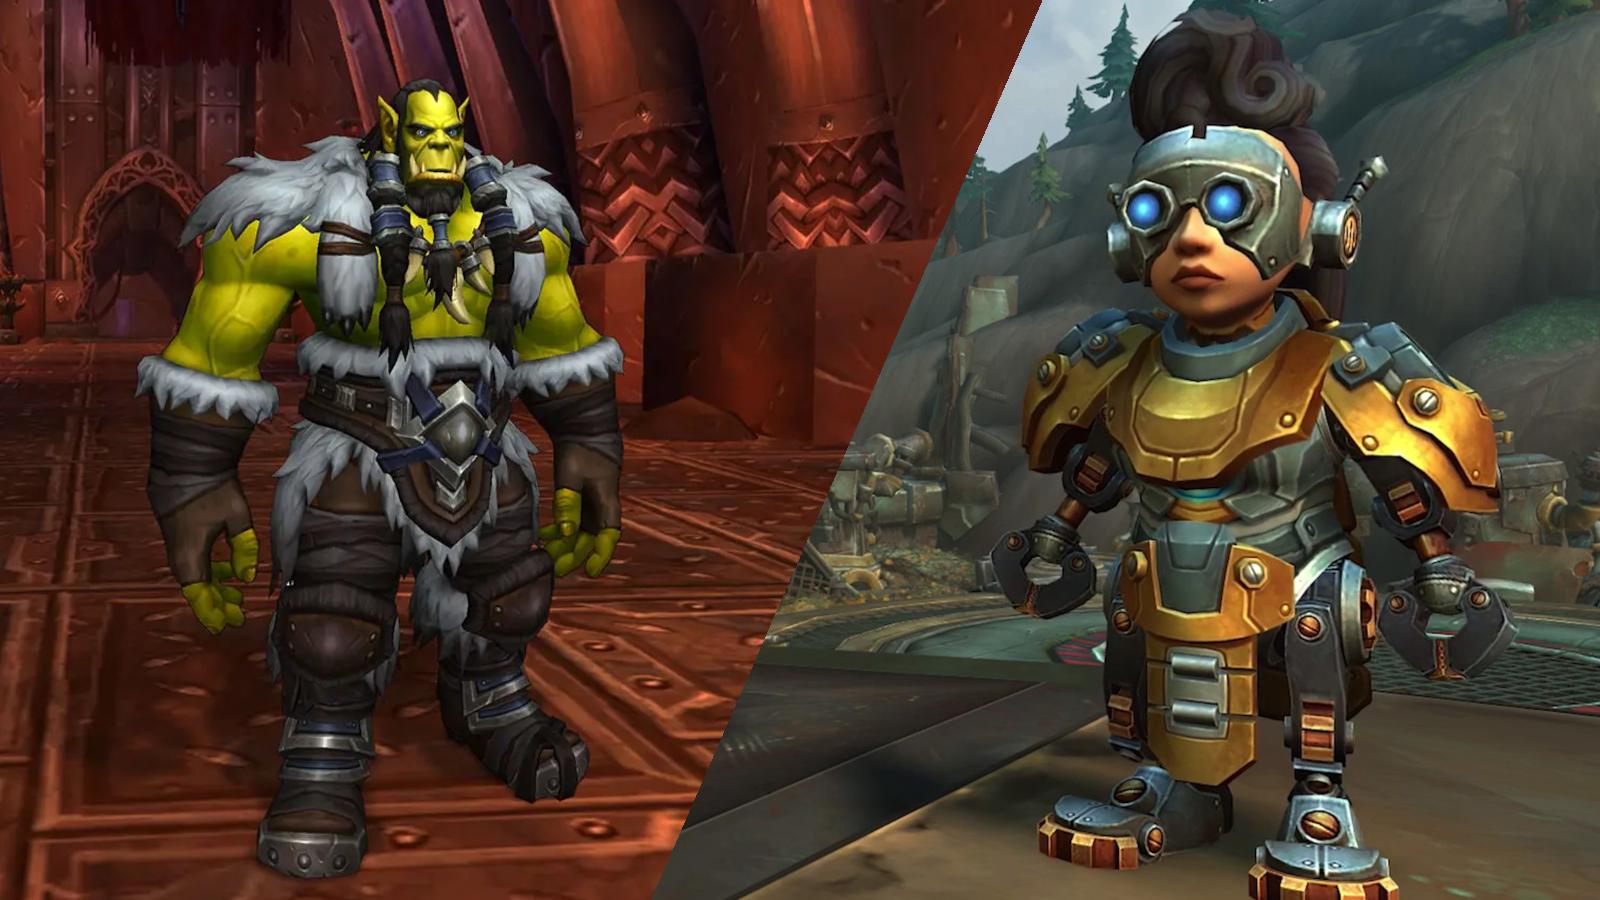 World of Warcraft's Orc (Left) and Mechagnome (Right)